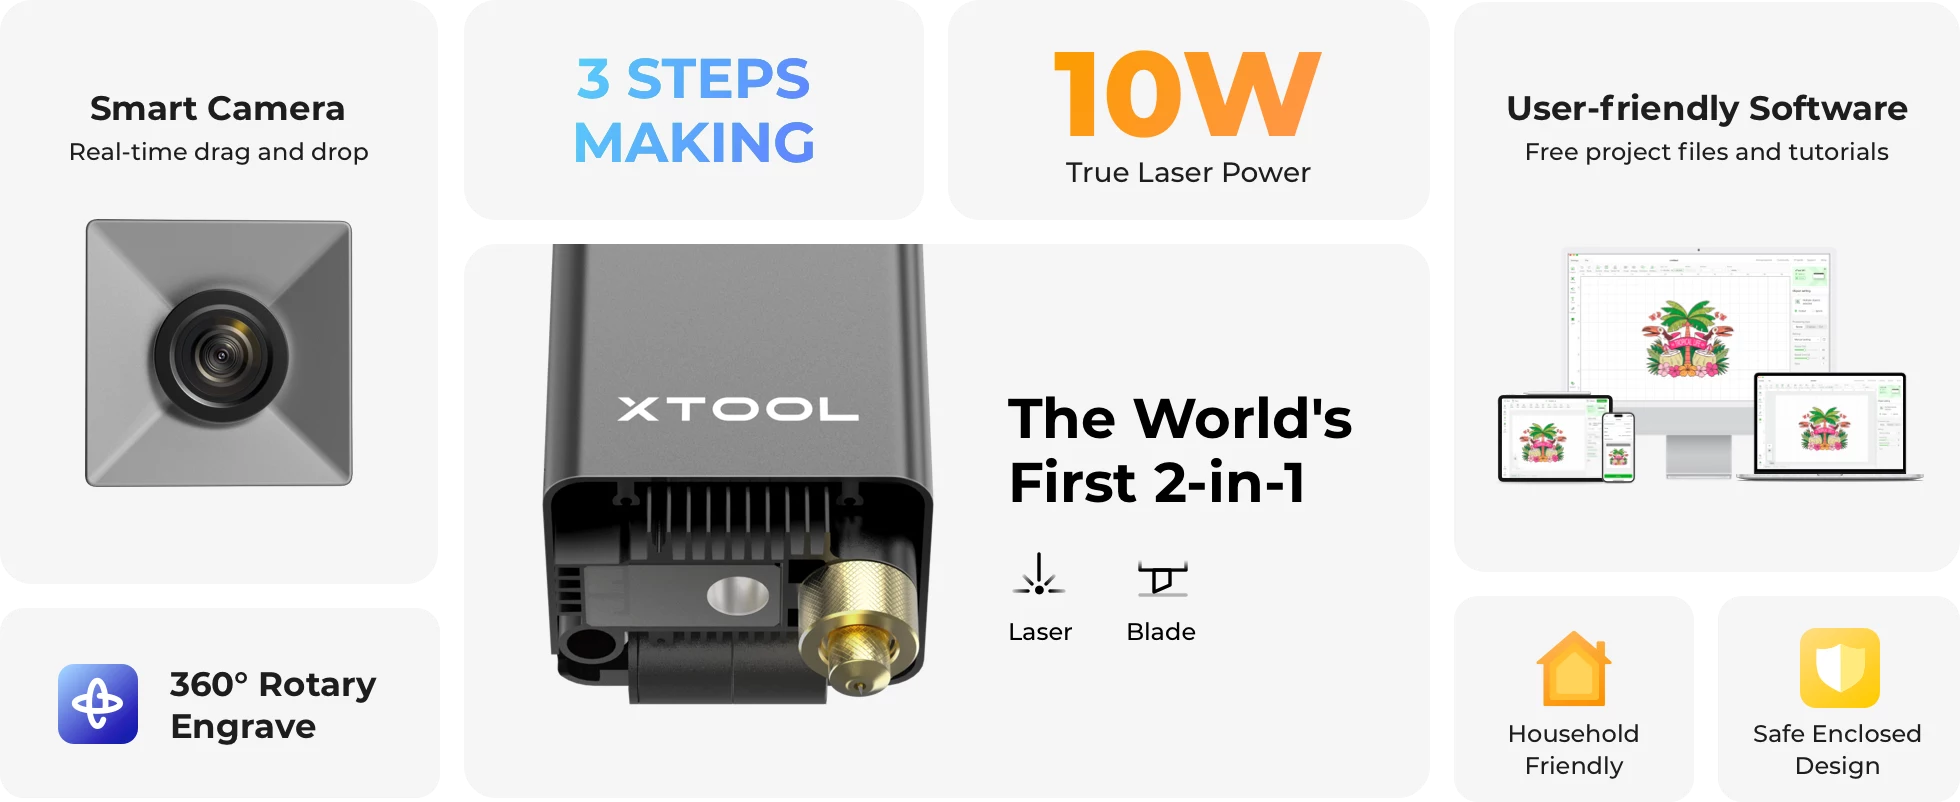 xTool M1 The World's First Smart 2-in-1 Laser Engraver and Vinyl Cutter 